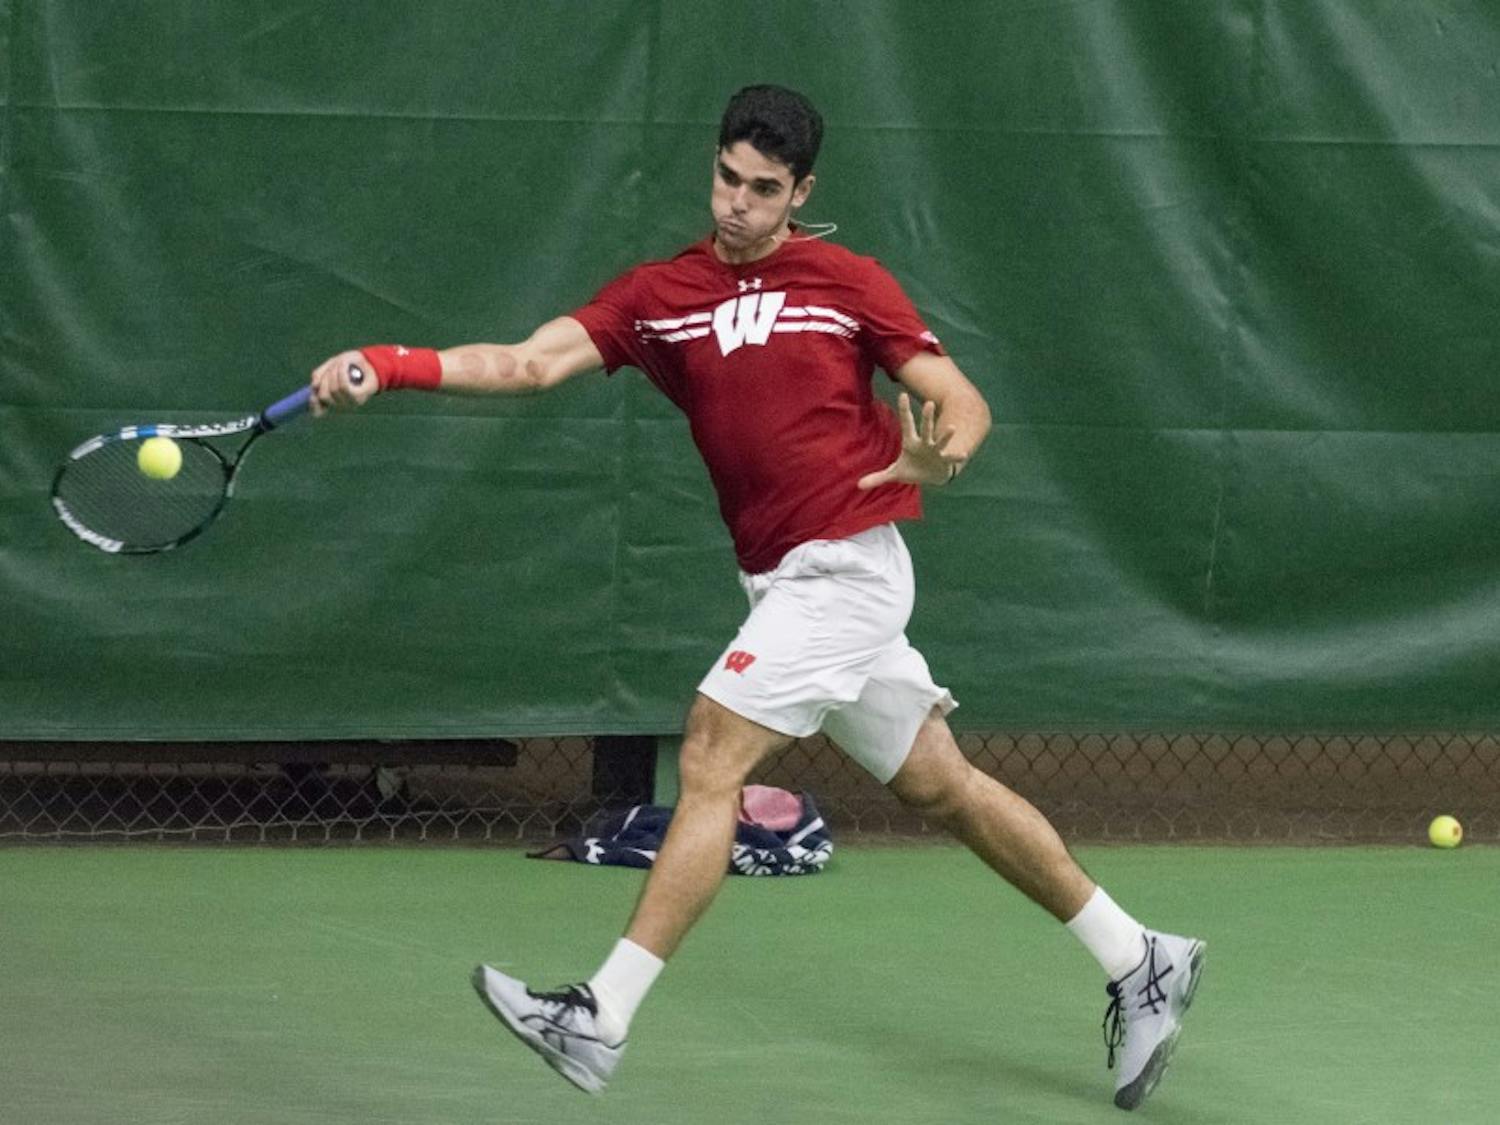 Wisconsin men's tennis picked up its first conference win and first road win of the season Saturday at Nebraska.&nbsp;